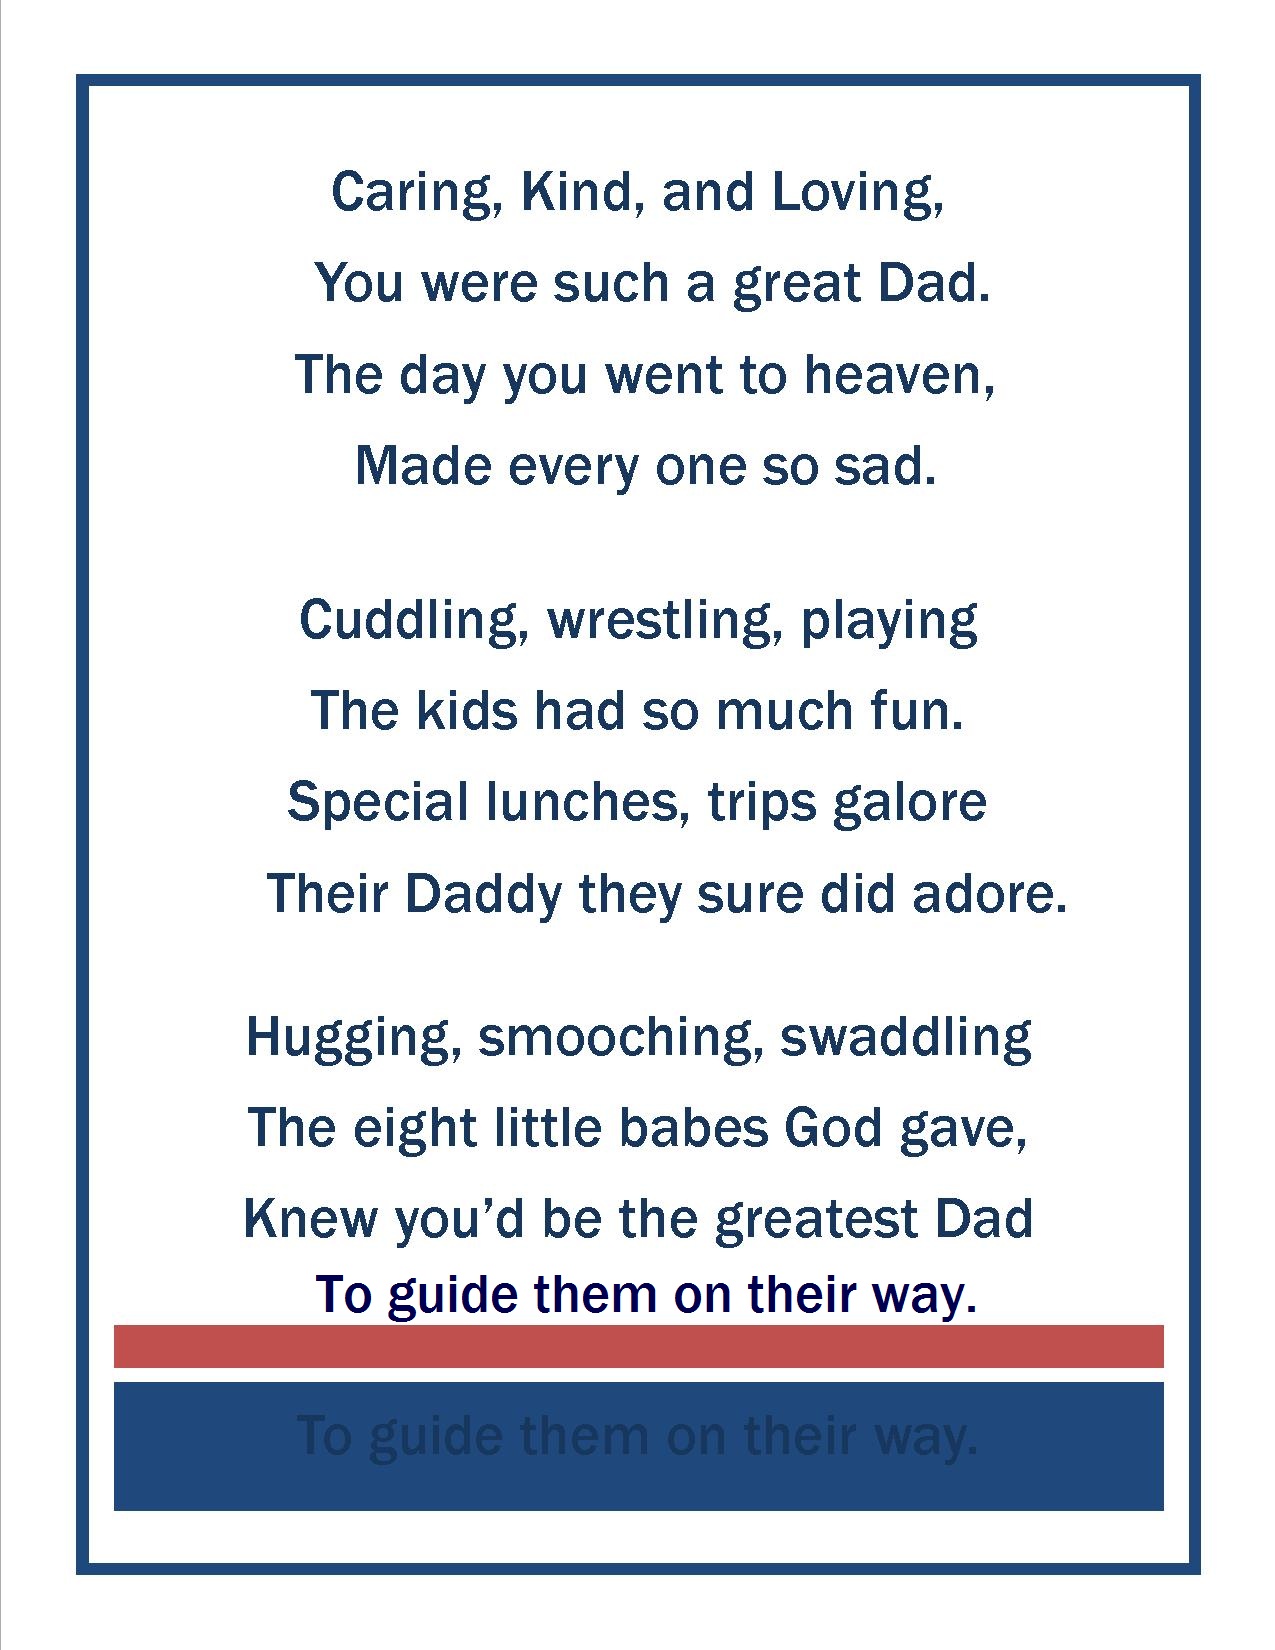 Happy Father's Day in Heaven, Jack. I wrote this poem for my husband for